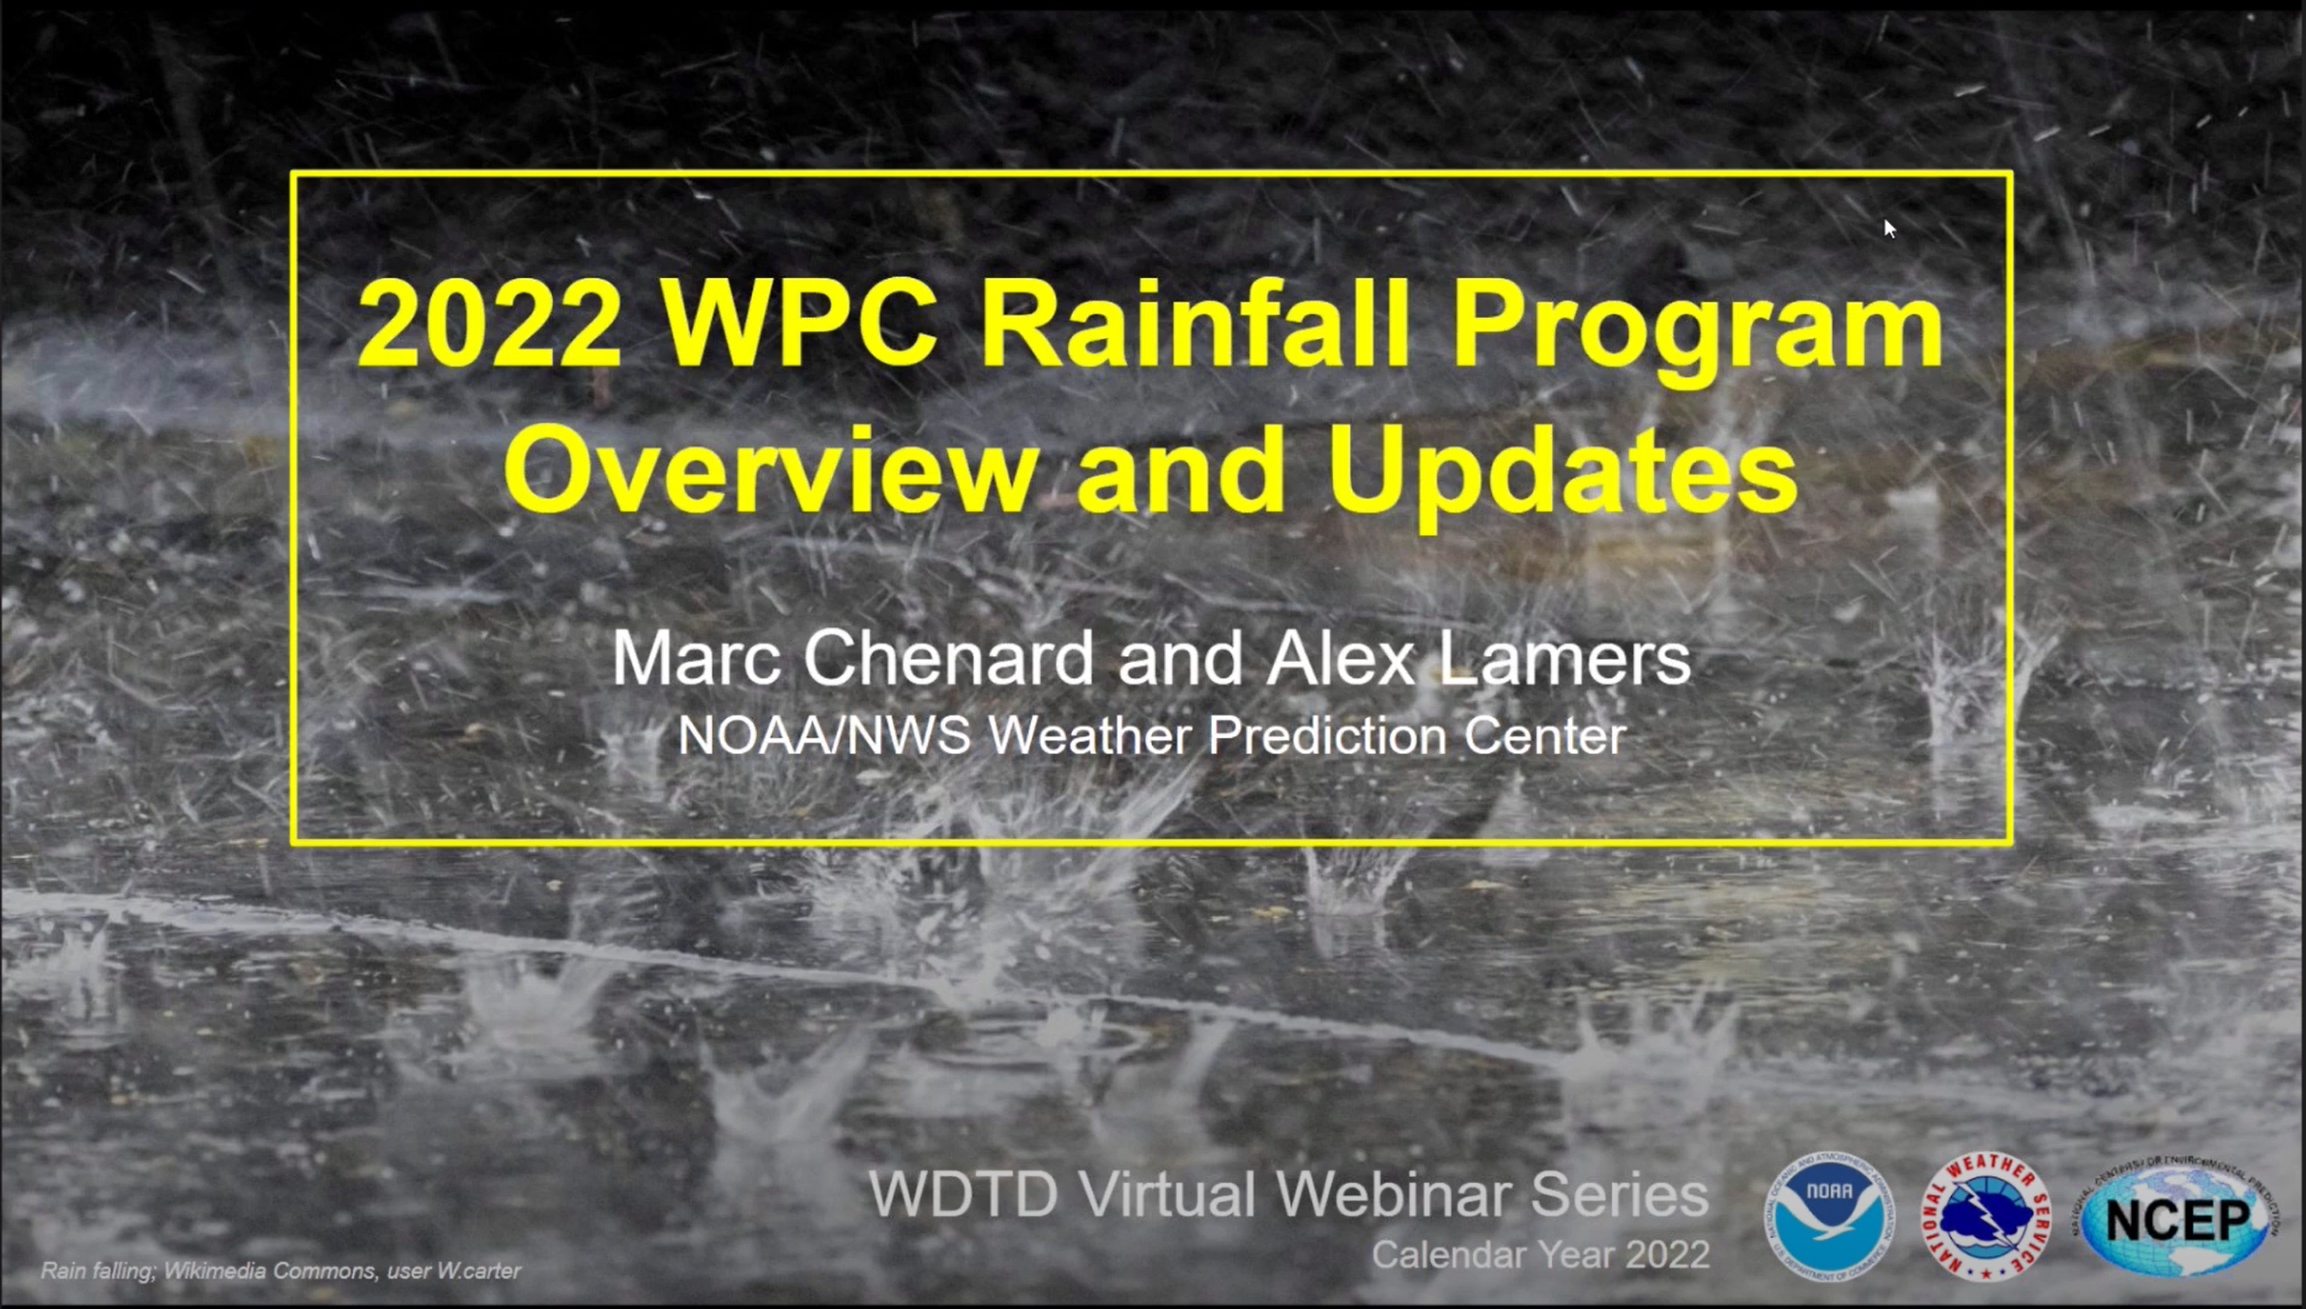 2022 WPC Rainfall Program Overview and Updates